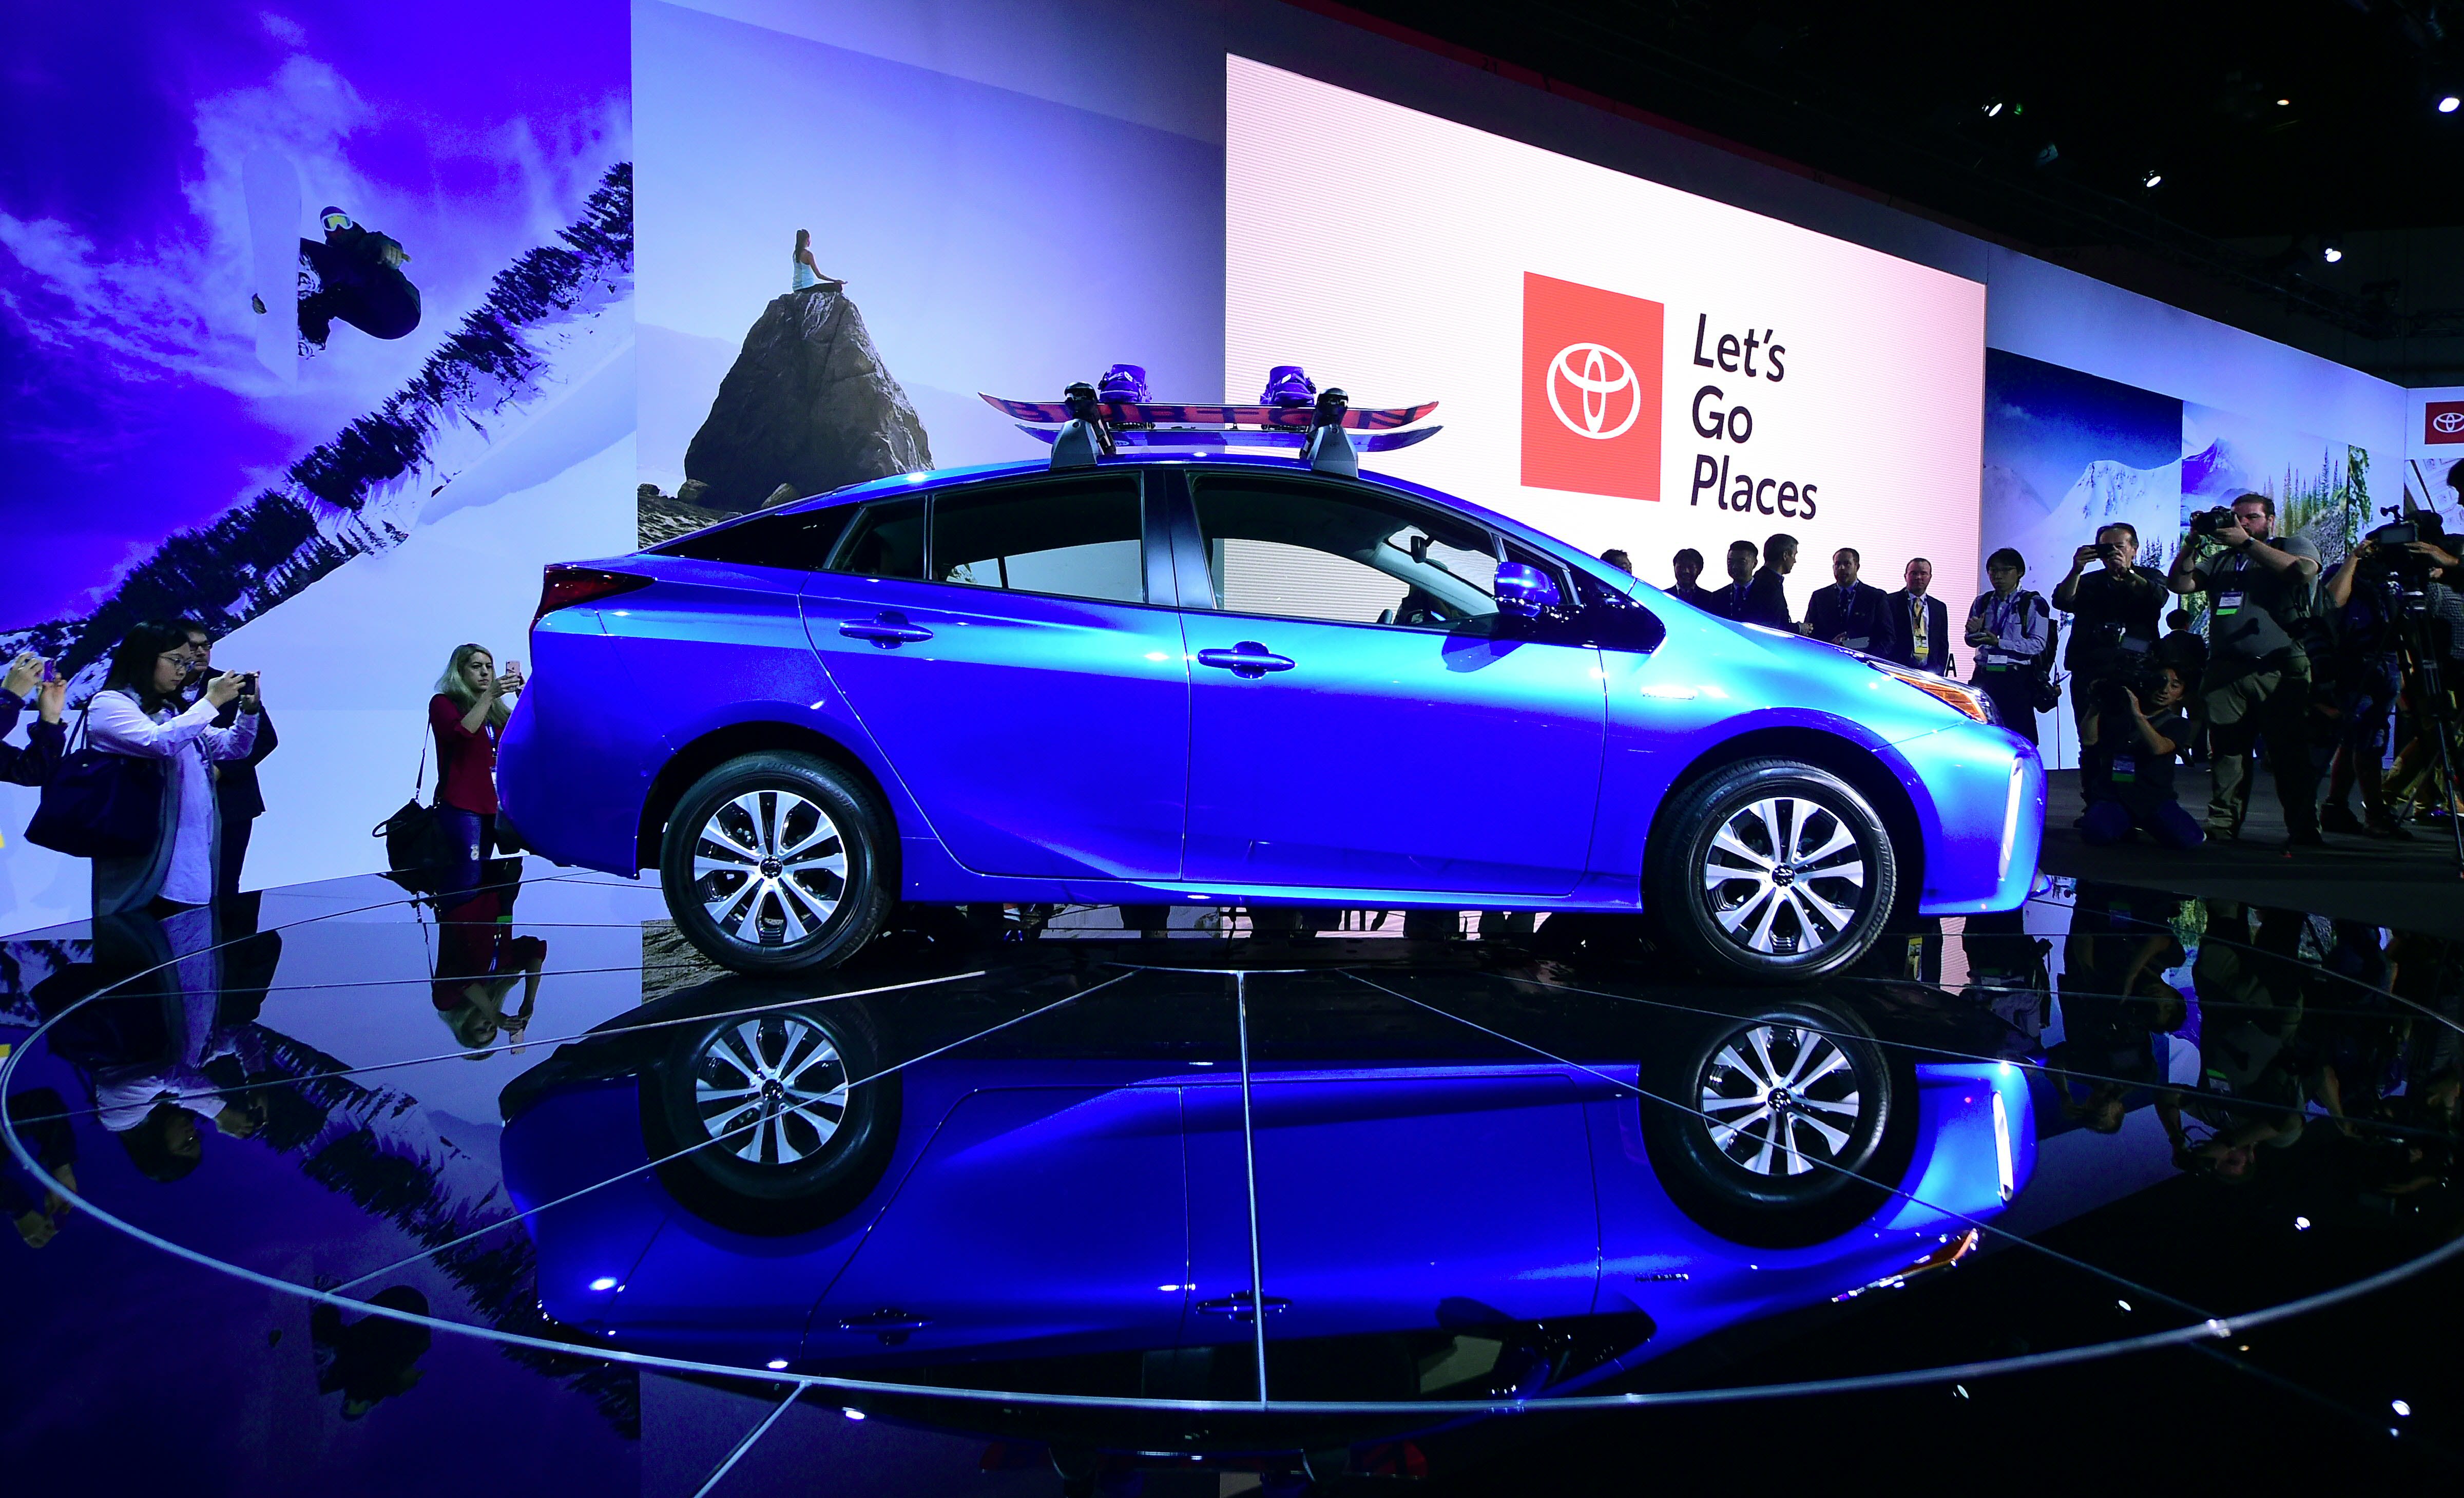 The breakthrough Toyota Prius became a victim of its own success